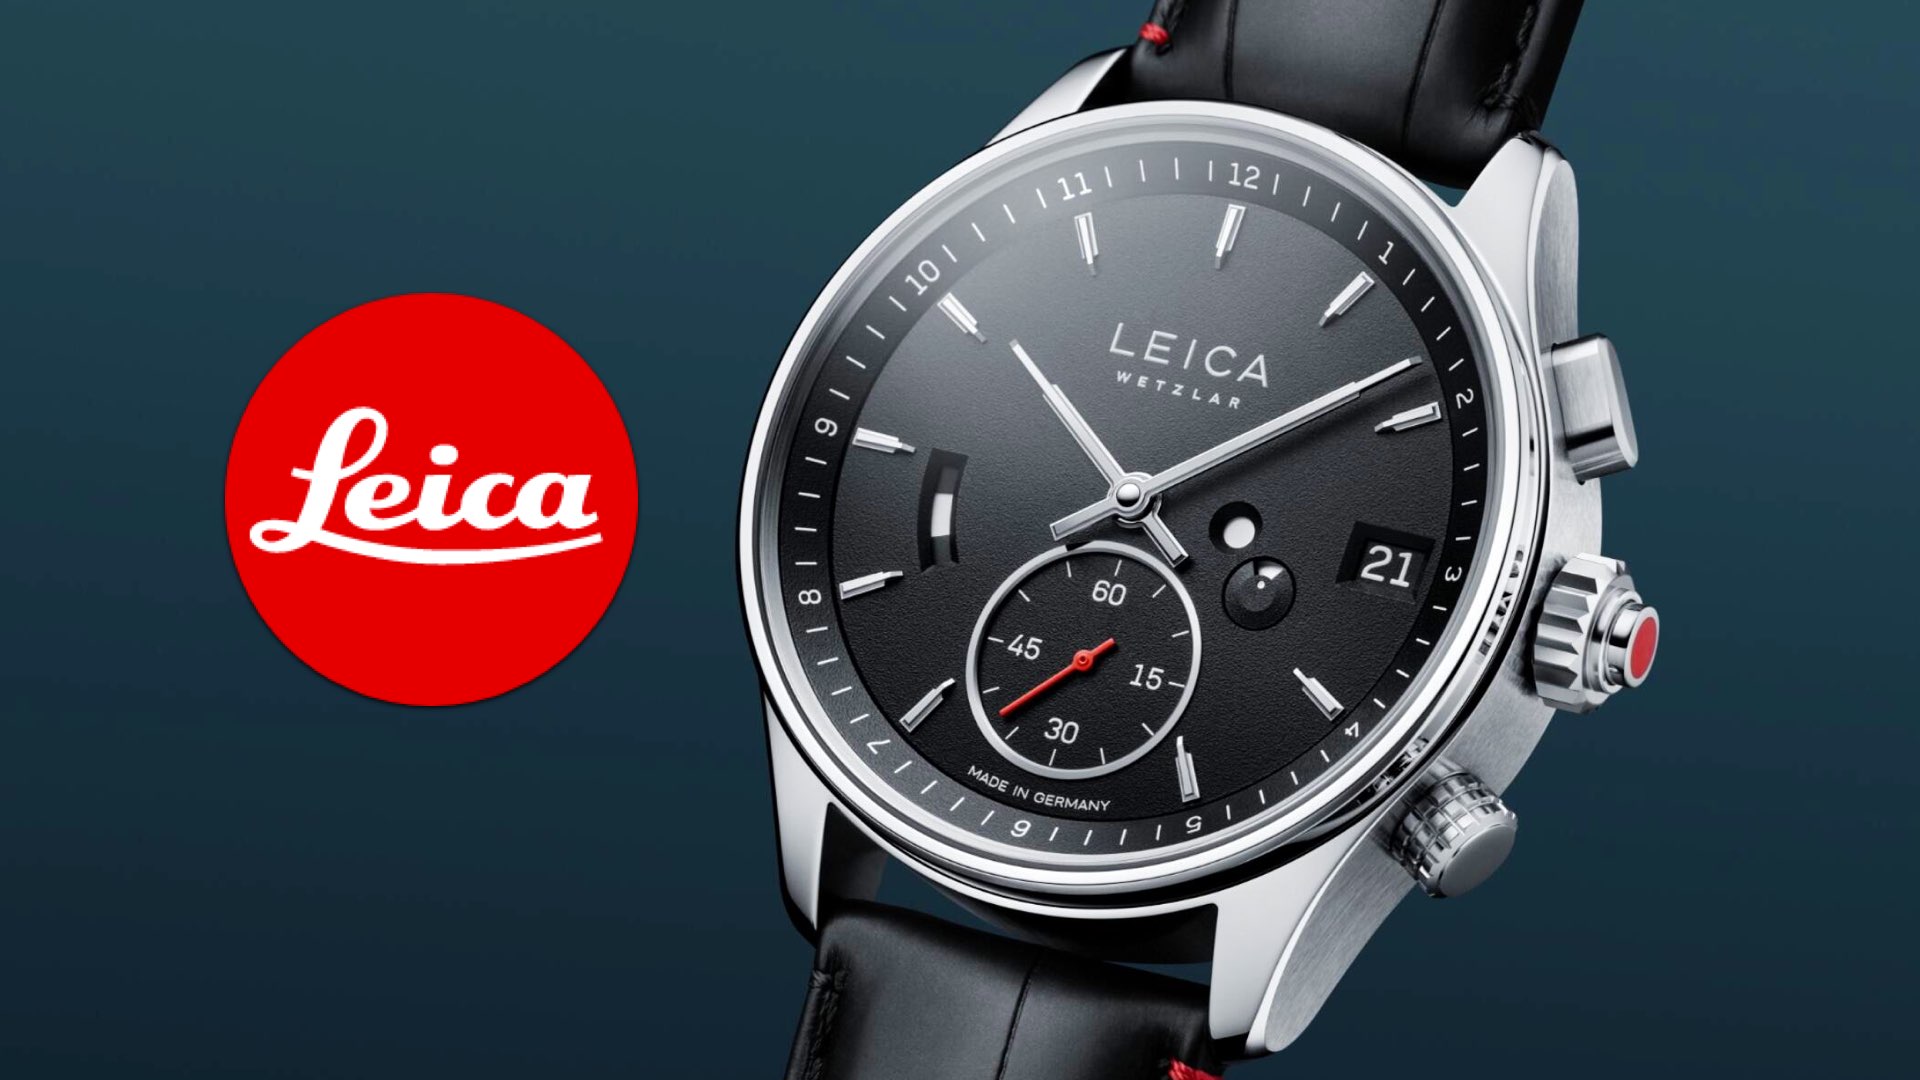 Leica Introduces the LEICA Watch. Price: $14,000